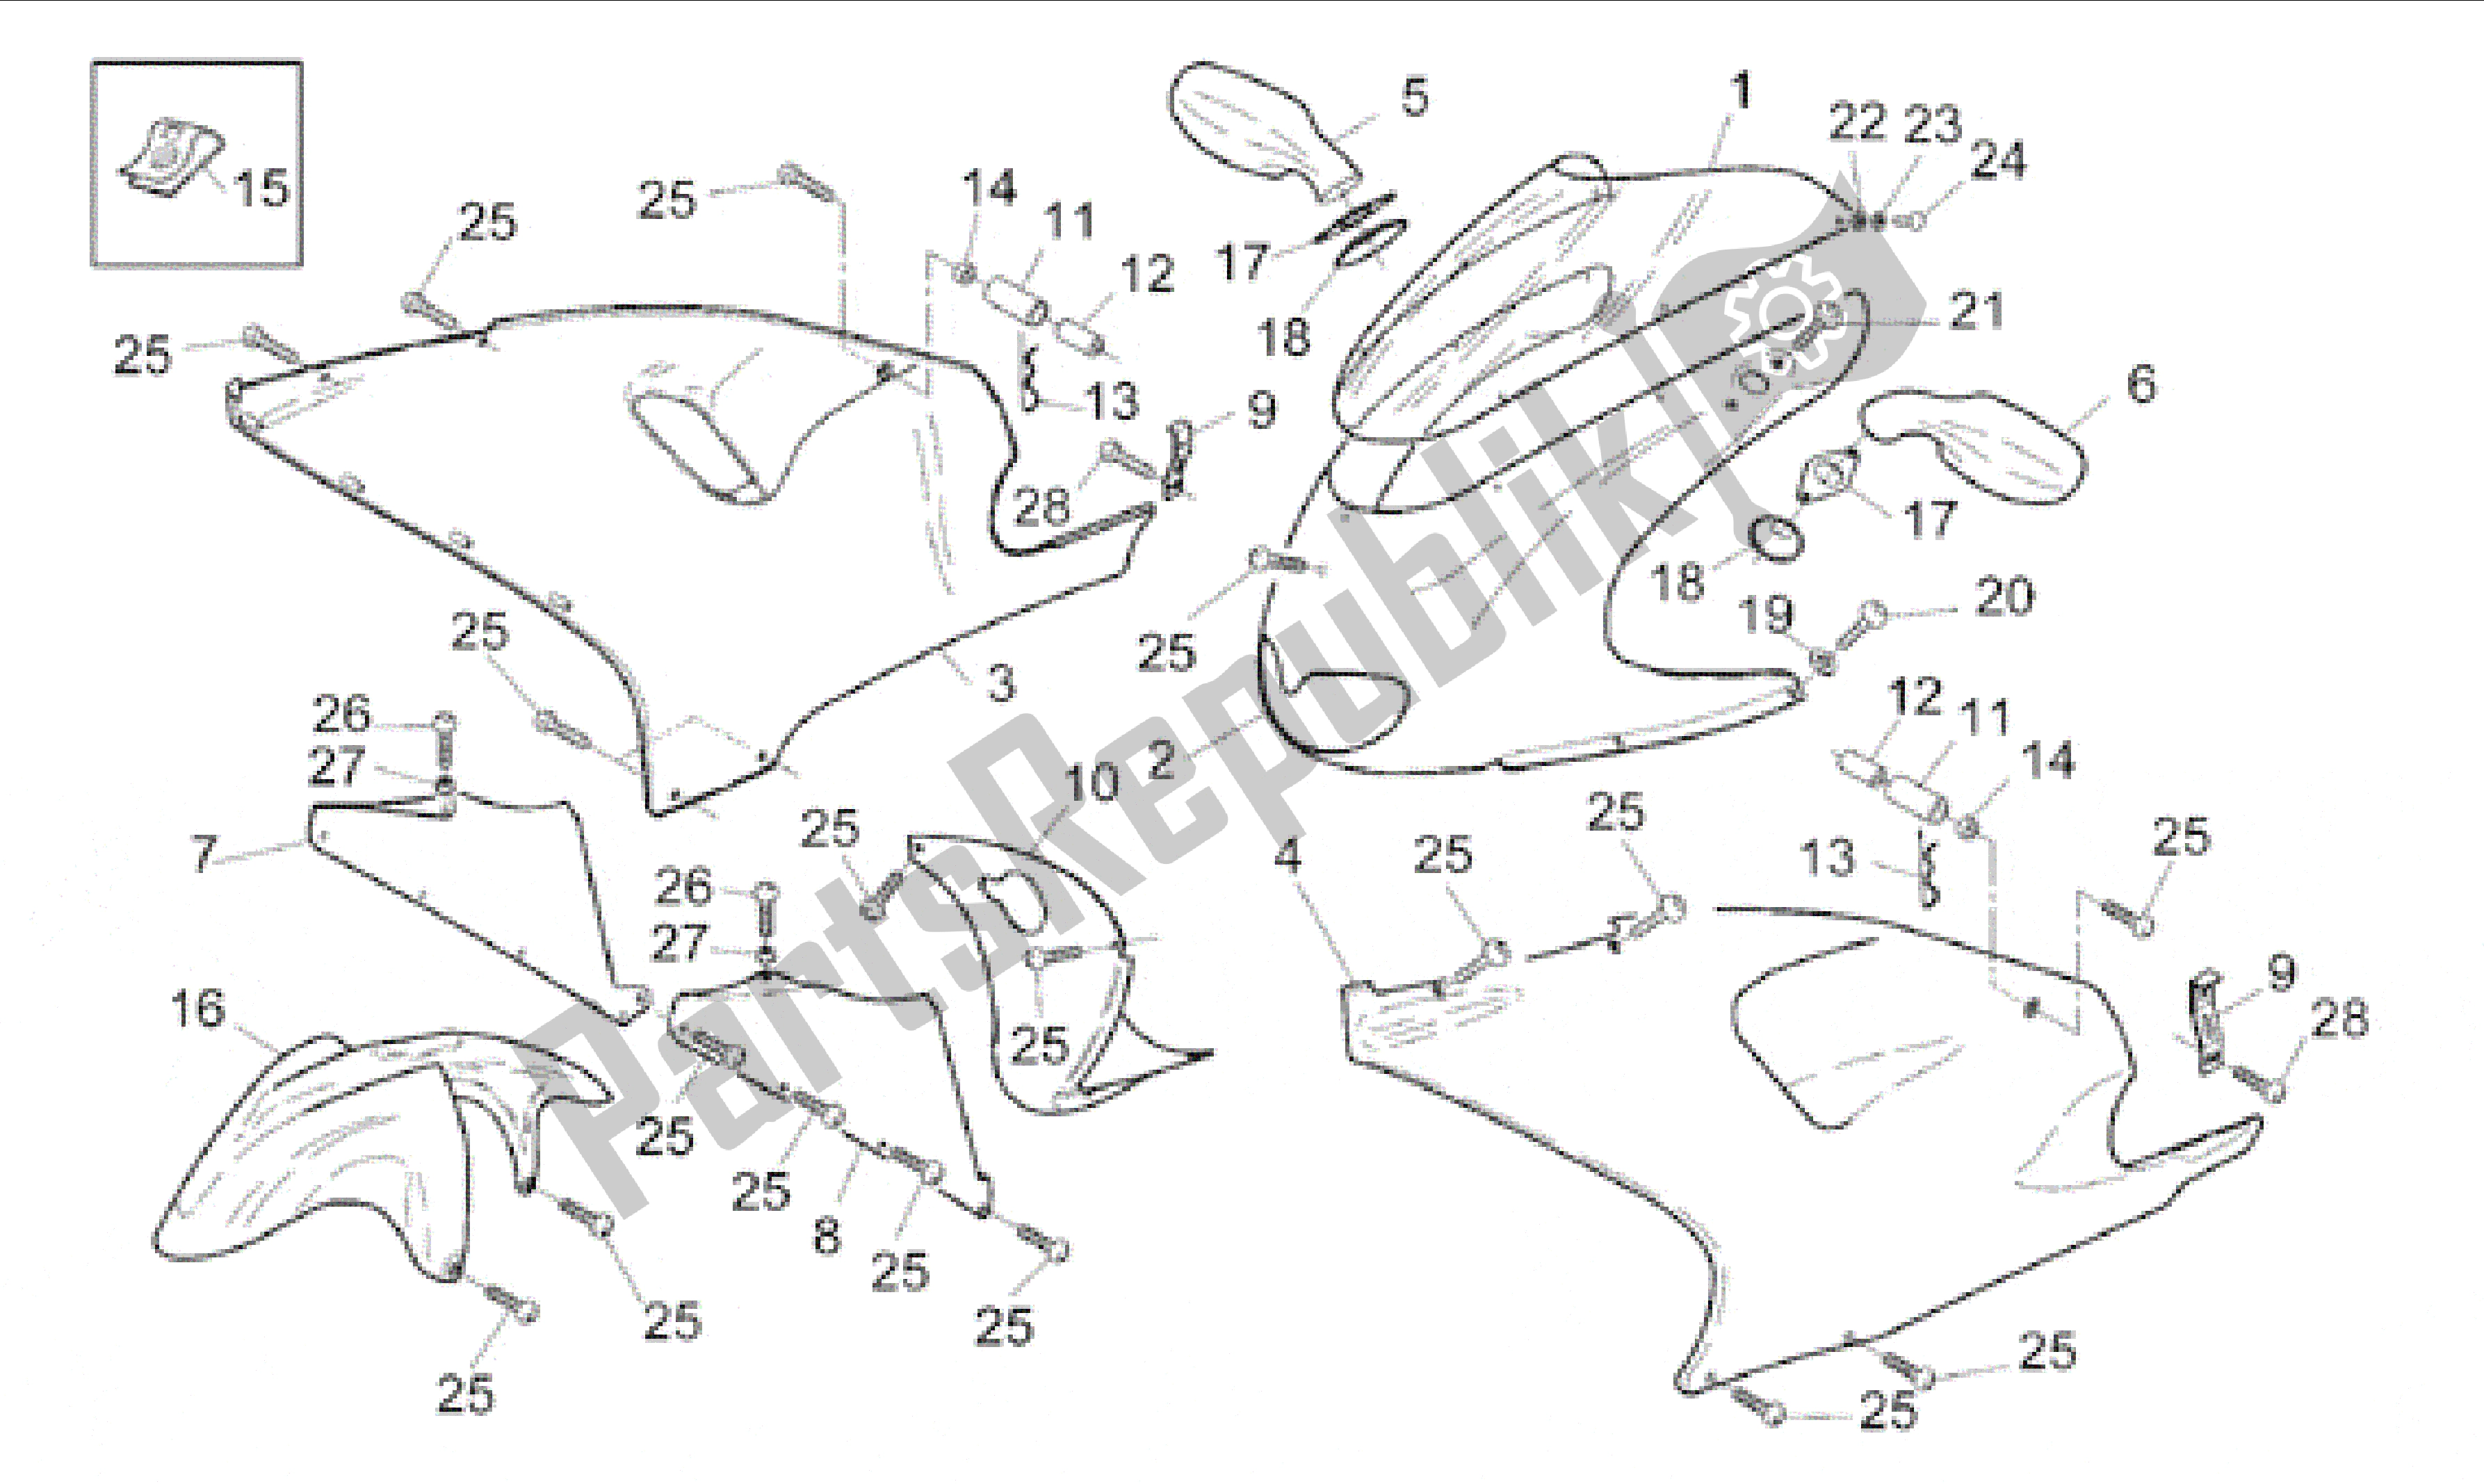 All parts for the Front Body I of the Aprilia RS 250 1995 - 1997